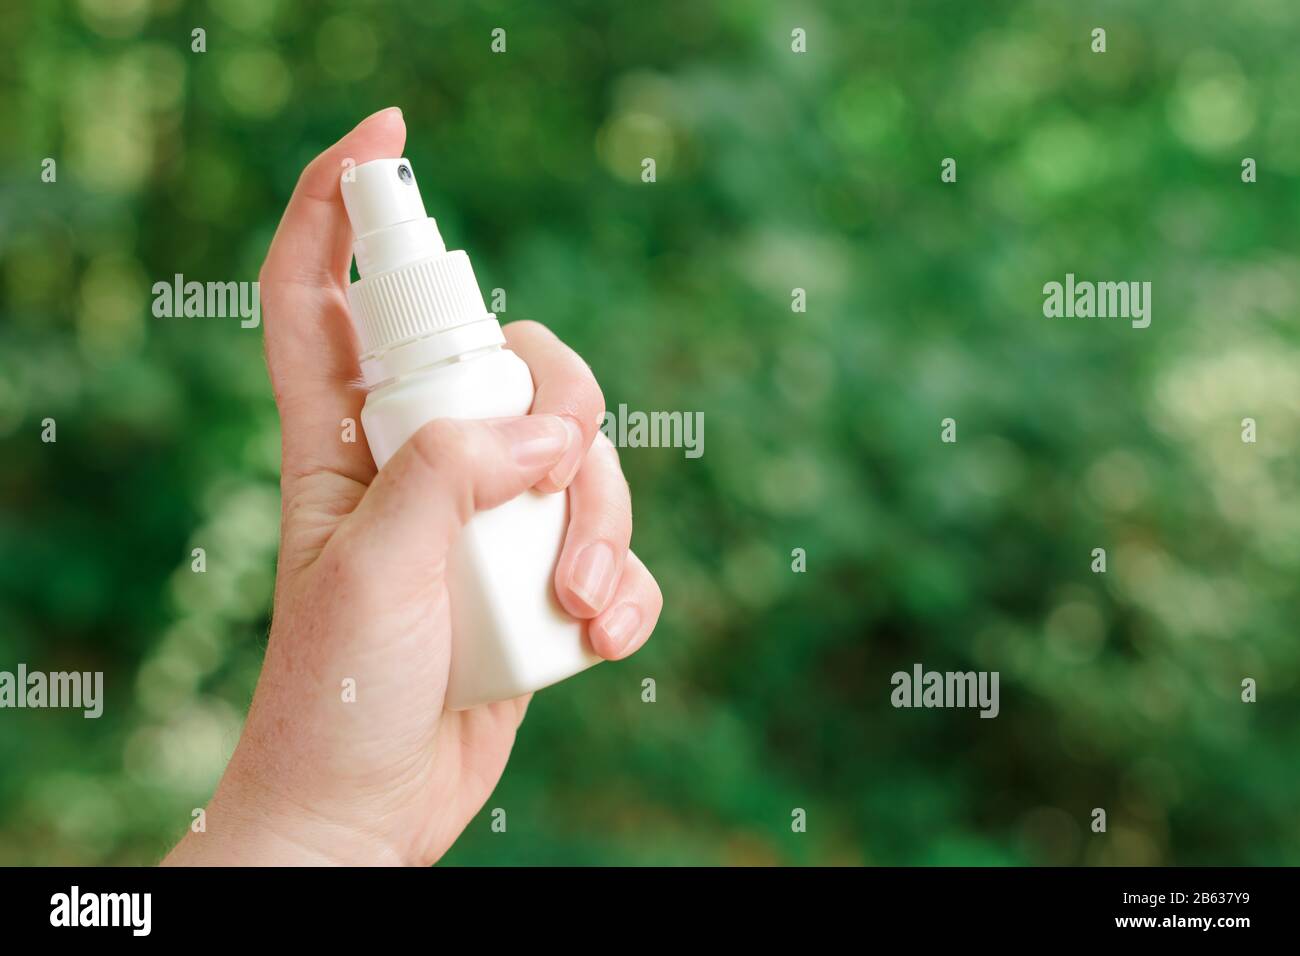 Woman using antiseptic spray outdoors in forest to protect the injury wound from infection, selective focus Stock Photo